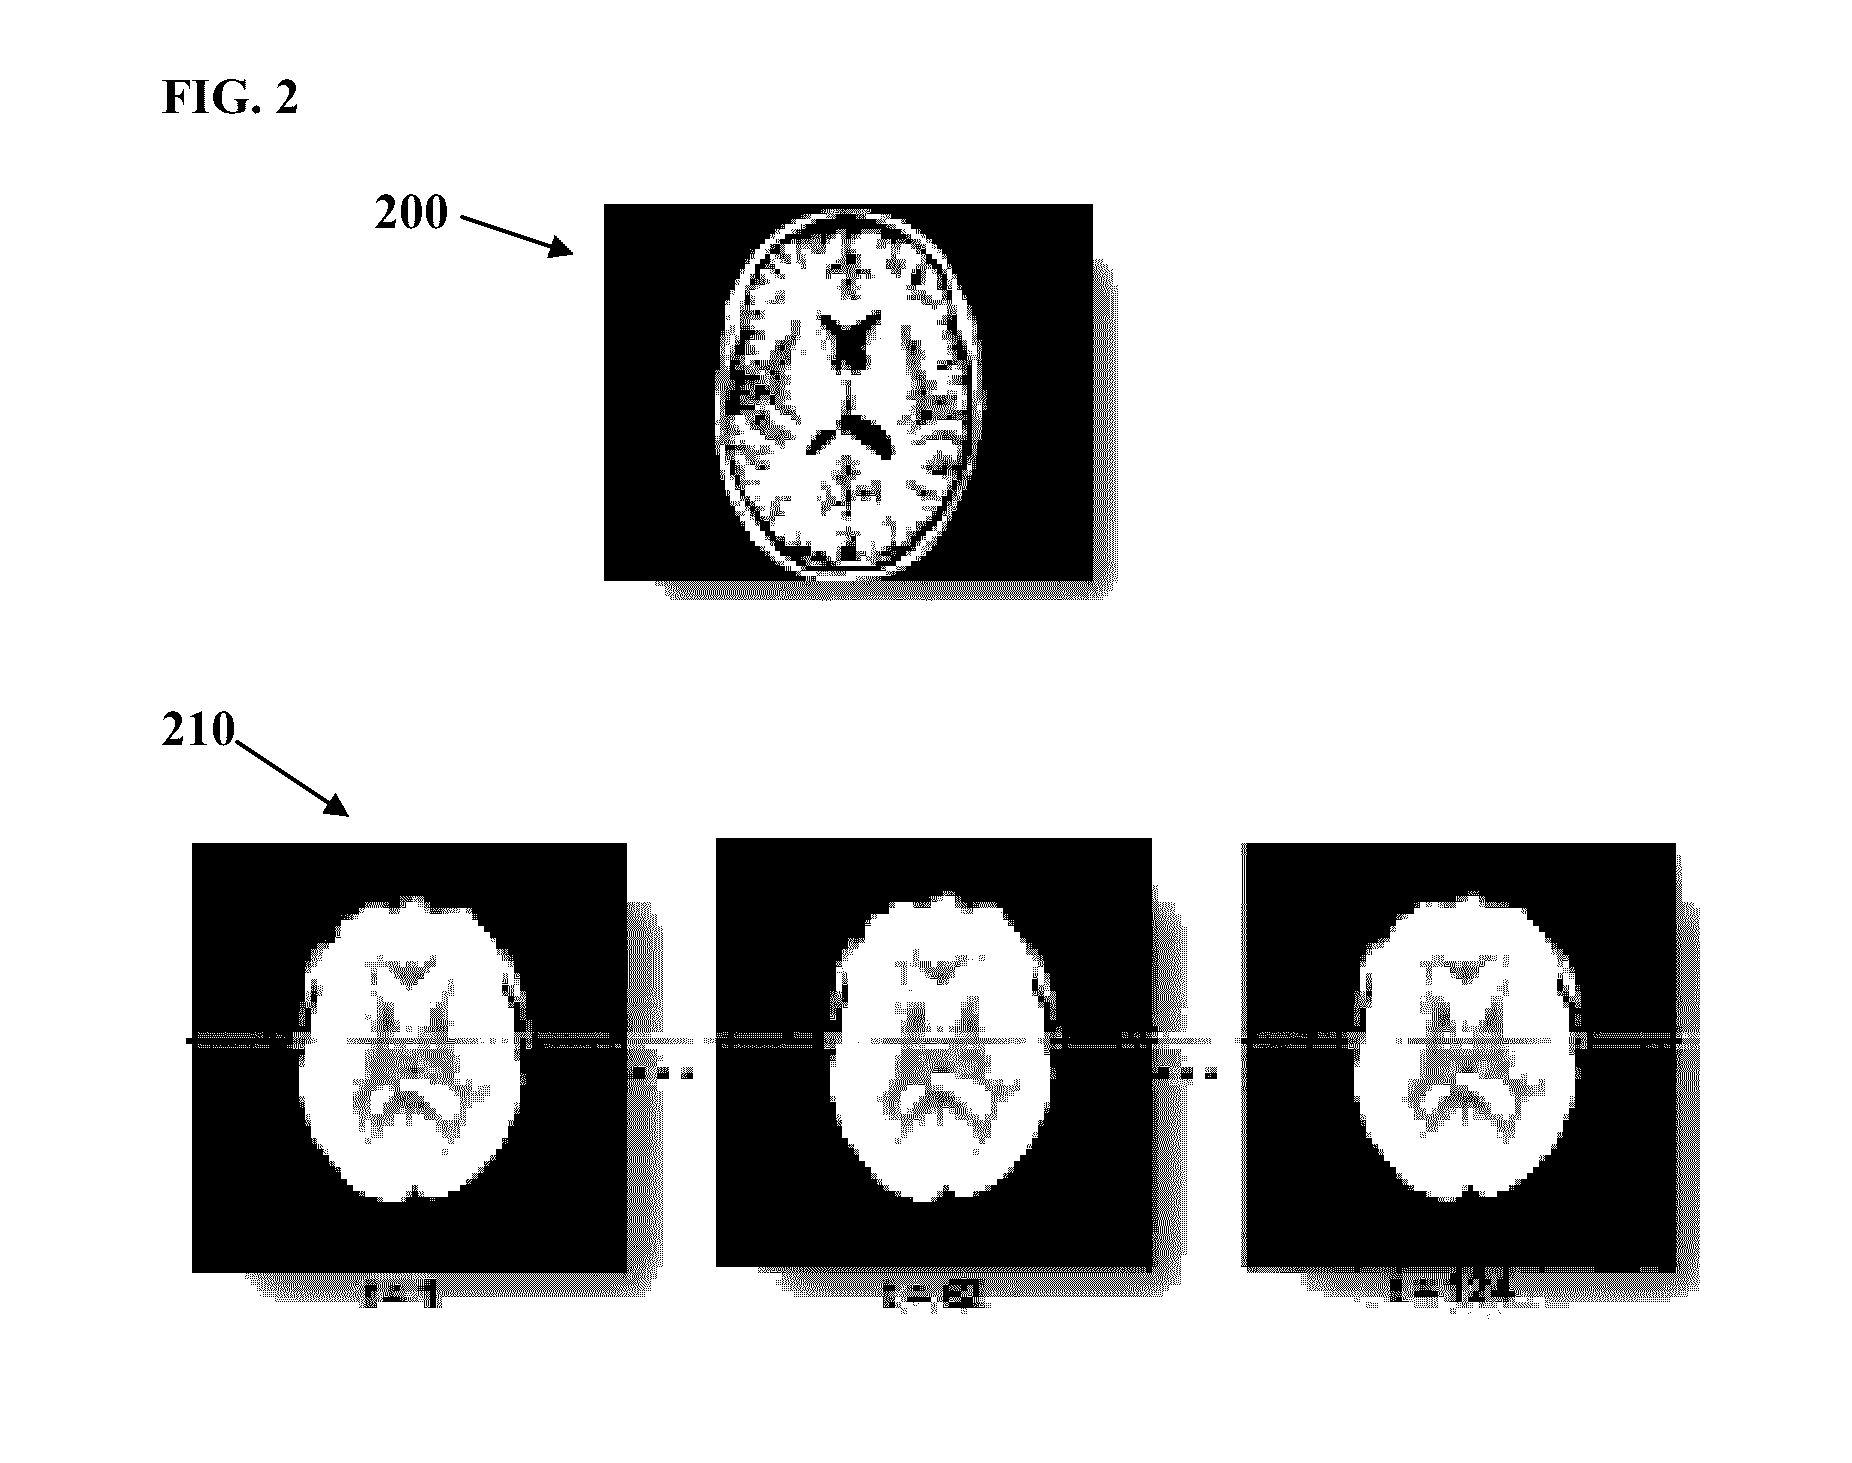 Method and system for diagnosis of attention deficit hyperactivity disorder from magnetic resonance images